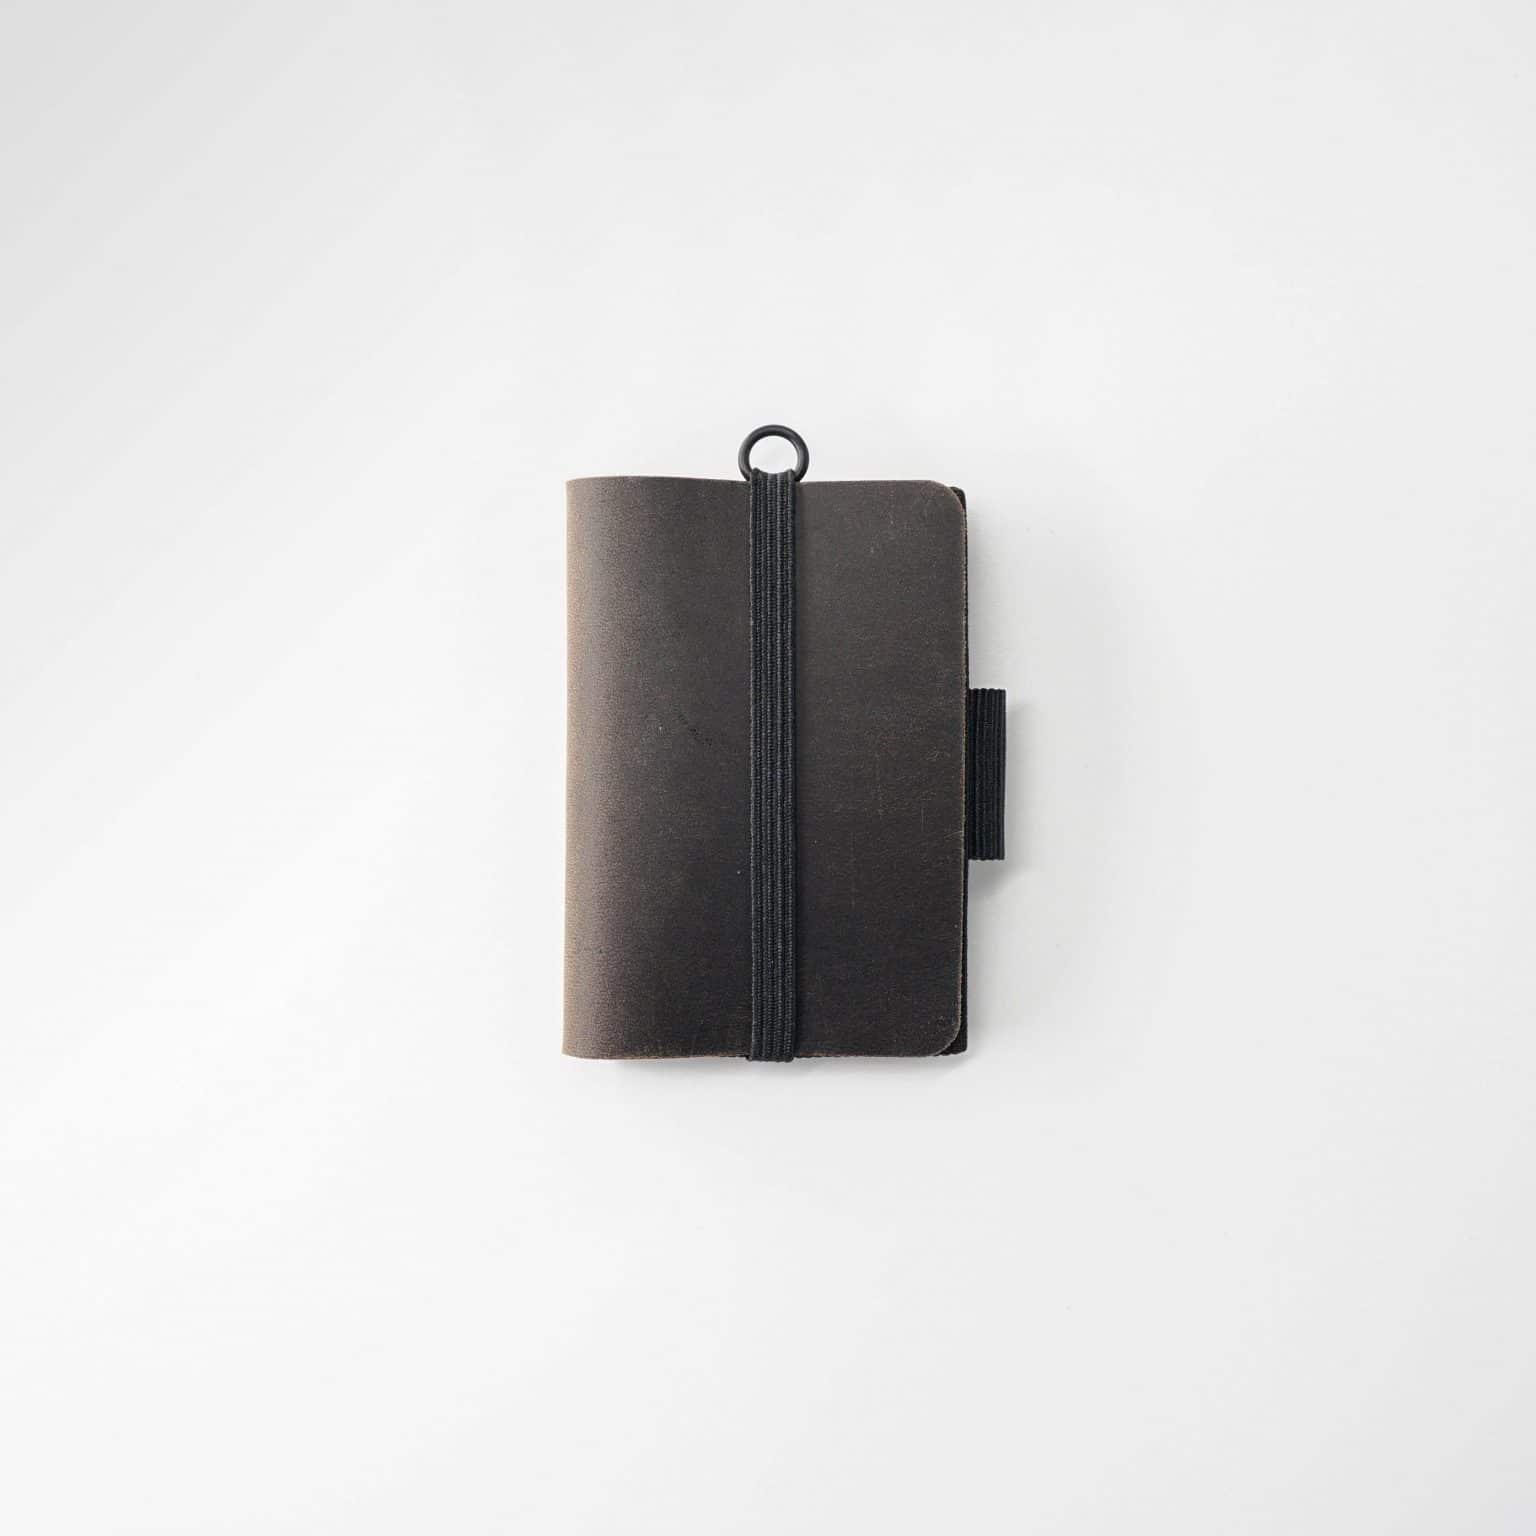 Stylish slim wallet with intuitive organization features.